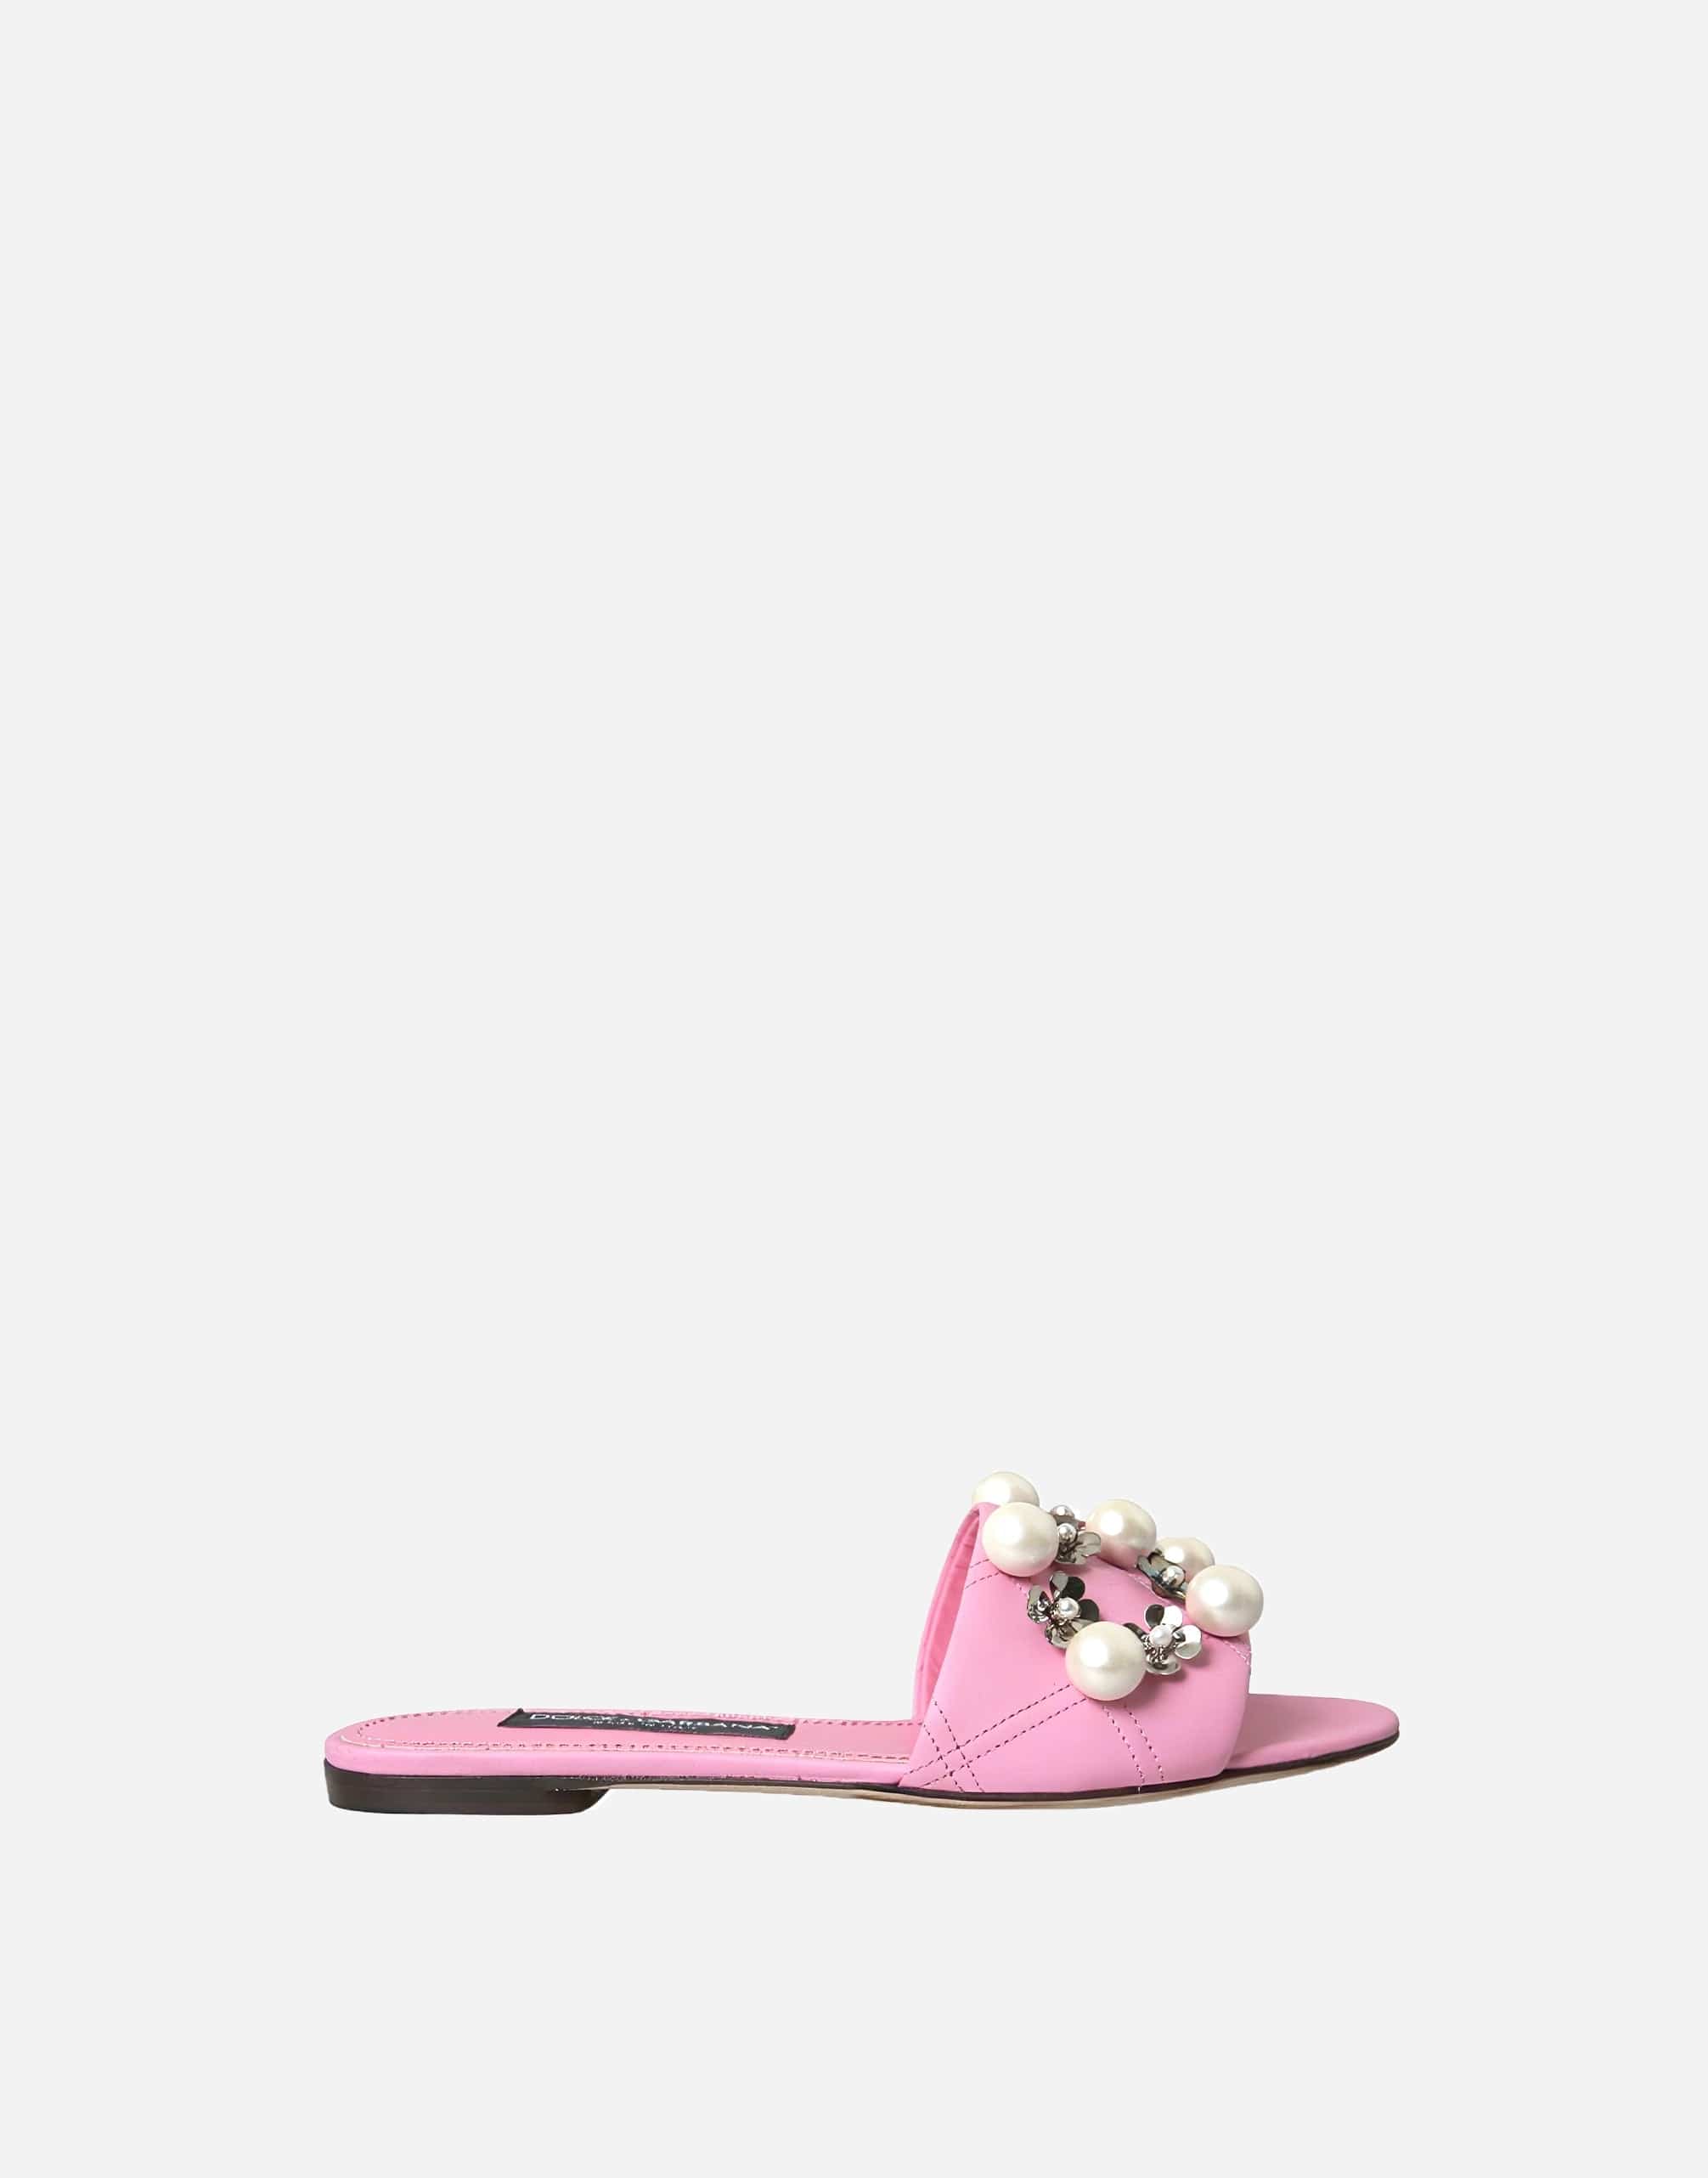 Dolce & Gabbana Flat Sandals With Embellished Pearls